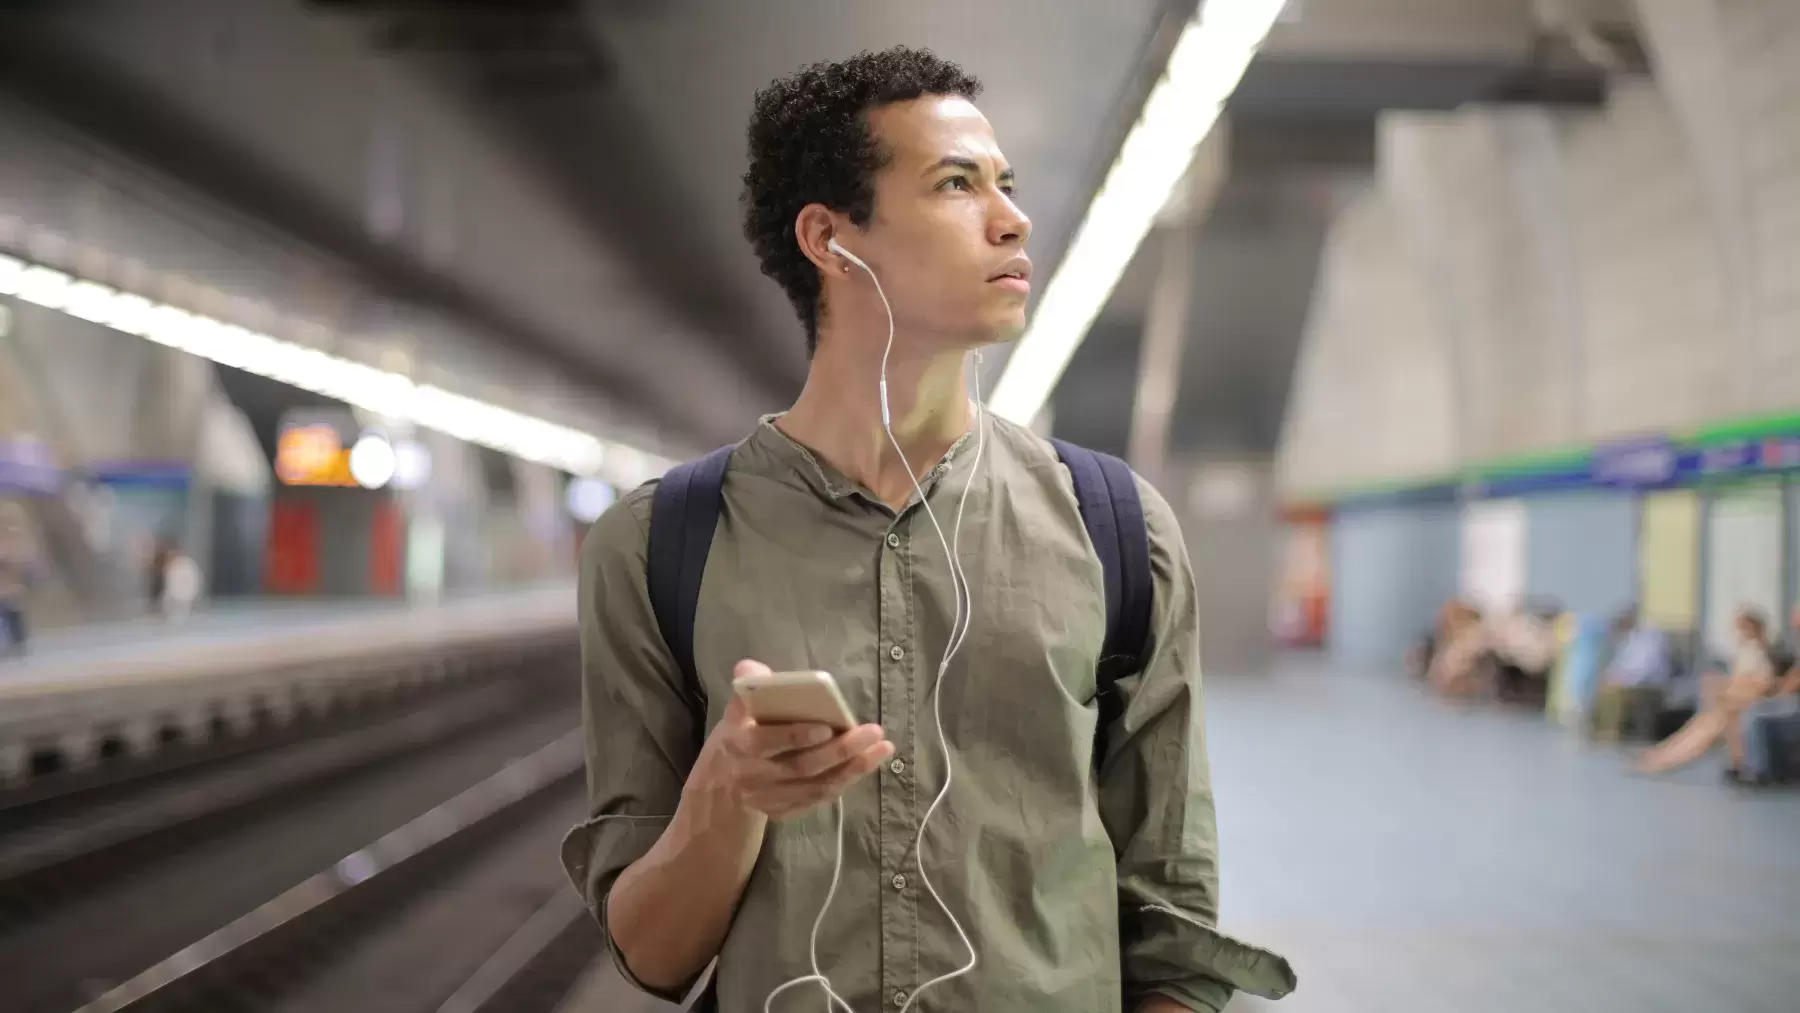 person wearing headphones while holding phone and looking to the side in a subway station